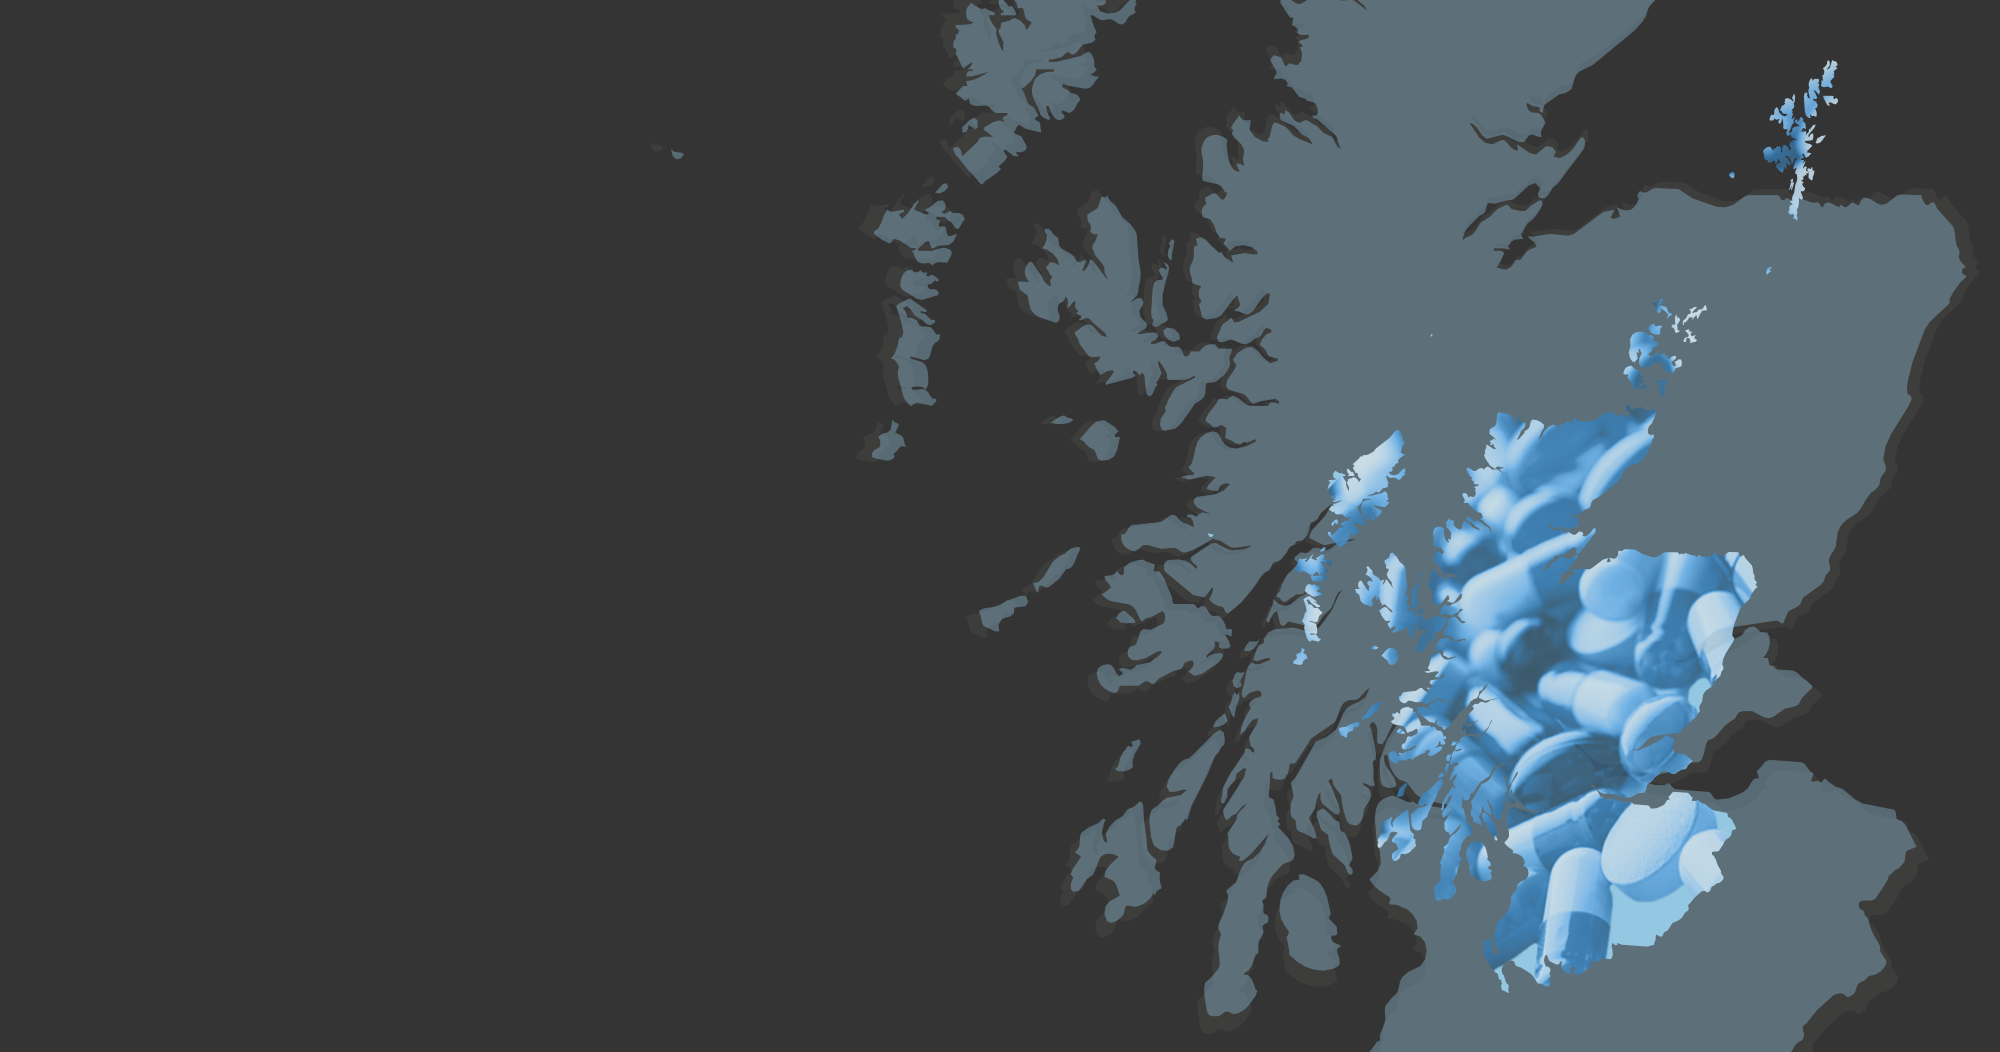 An image of blue pills in the shape of a map of Scotland, overlaid on a larger grey map of Scotland on a dark grey background